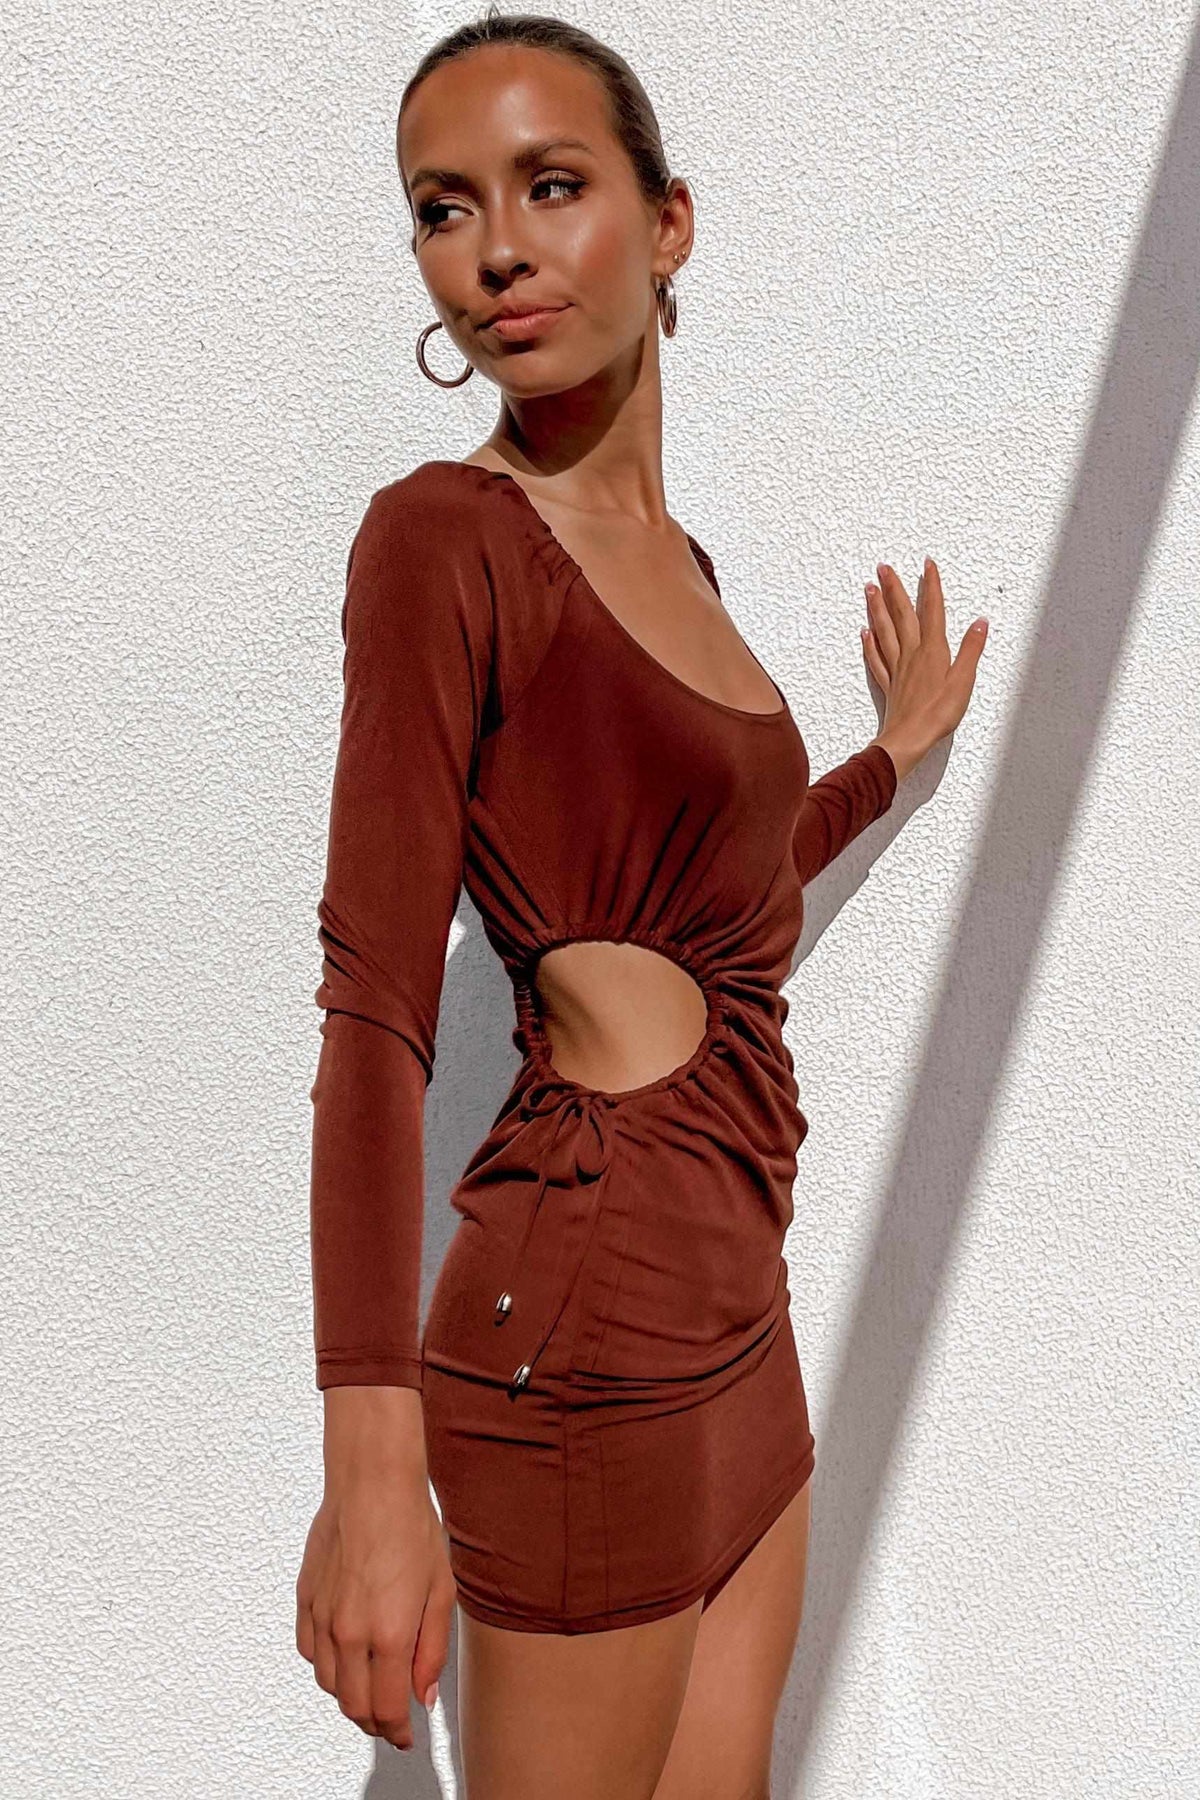 Just A Lover Dress, BASICS, BROWN, CUT OUT, DRESS, DRESSES, GATHERED, LONG SLEEVE, MINI DRESS, RED, Sale, Just A Lover Dress only $66.00 @ MISHKAH ONLINE FASHION BOUTIQUE, Shop The Latest Women&#39;s Dresses - Our New Just A Lover Dress is only $66.00, @ MISHKAH ONLINE FASHION BOUTIQUE-MISHKAH